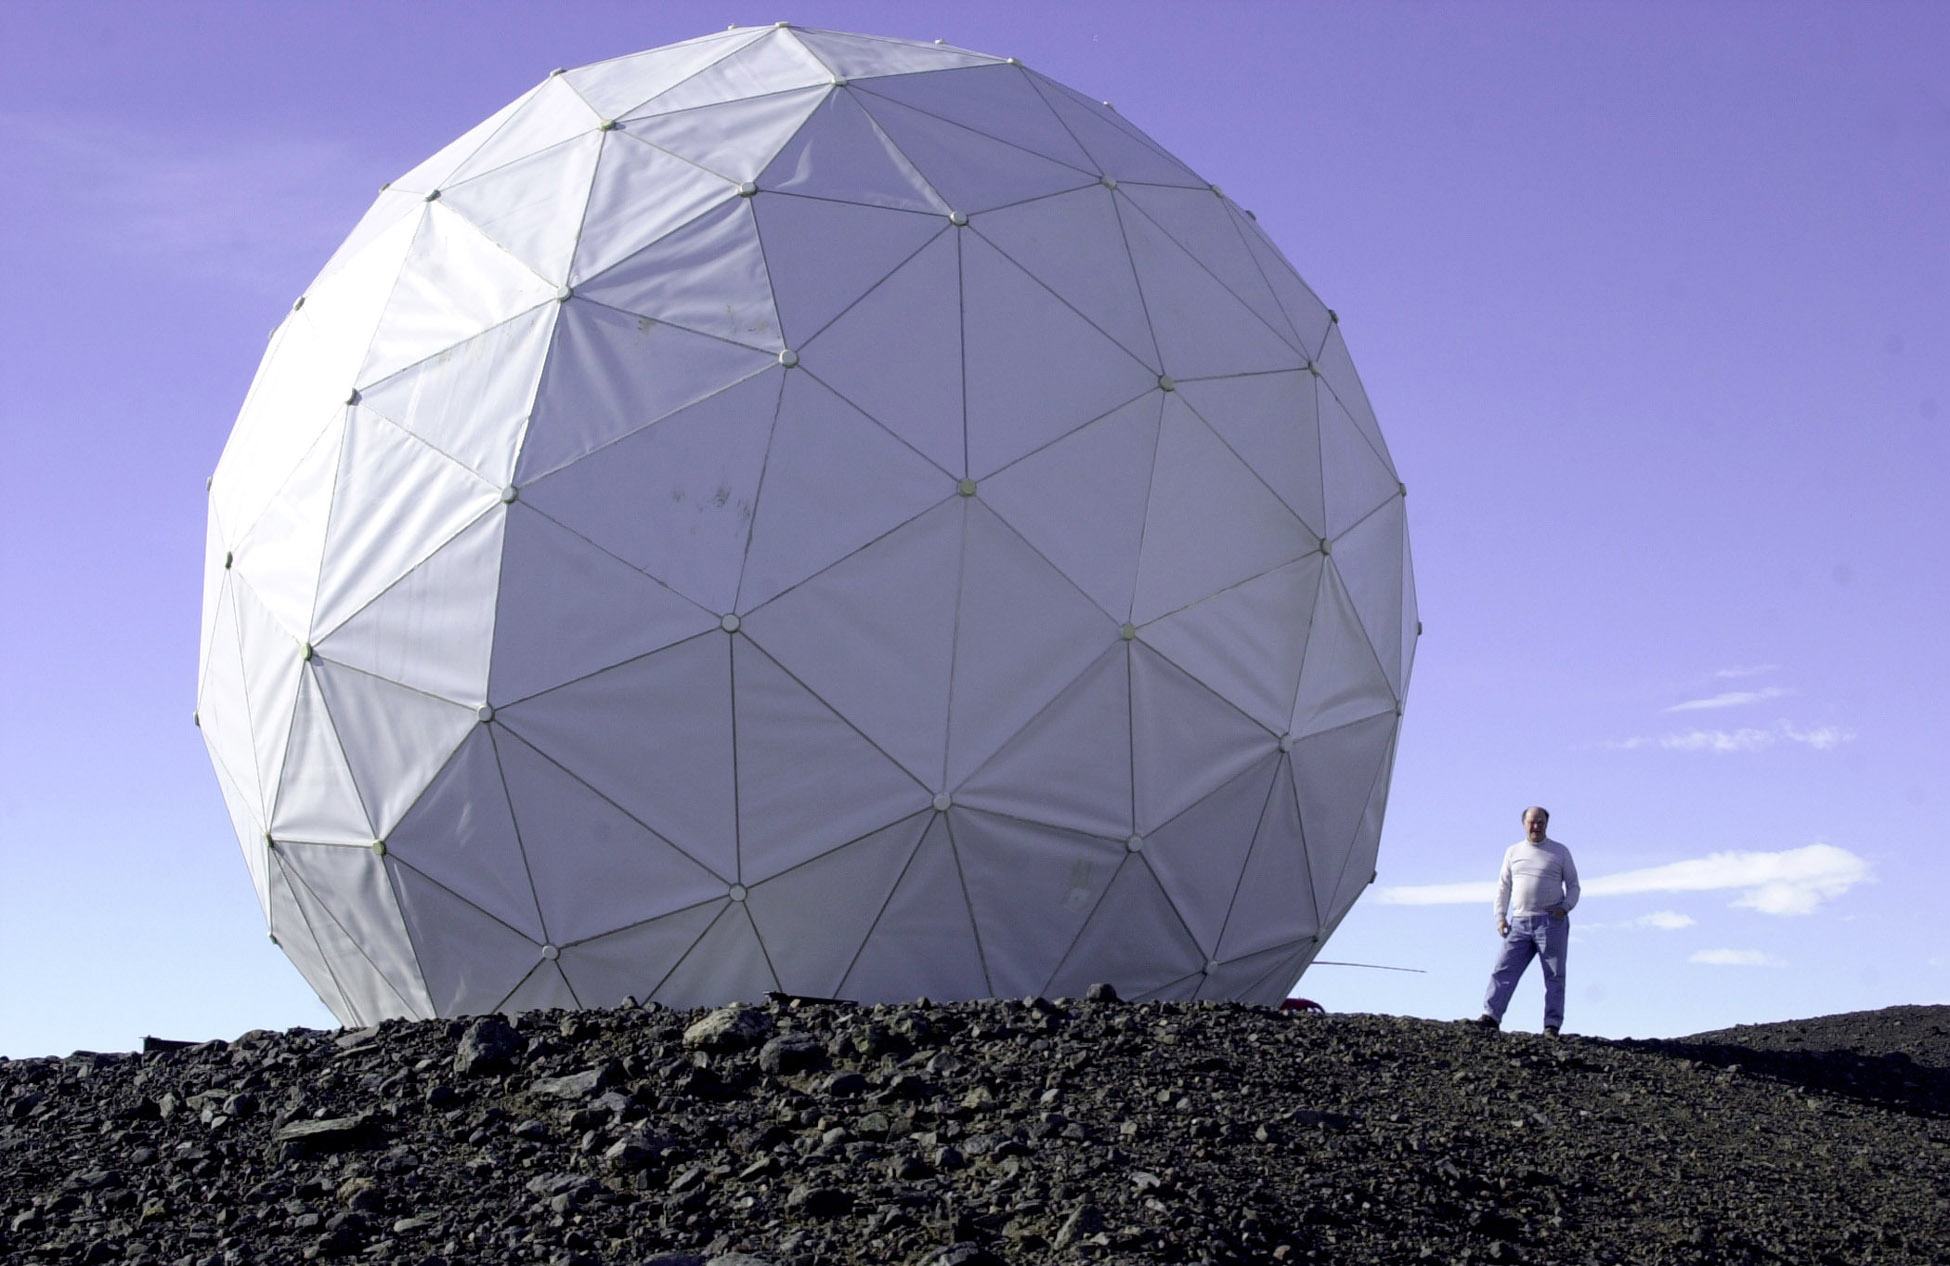 A man stands next to a large geodesic sphere on rocky ground.